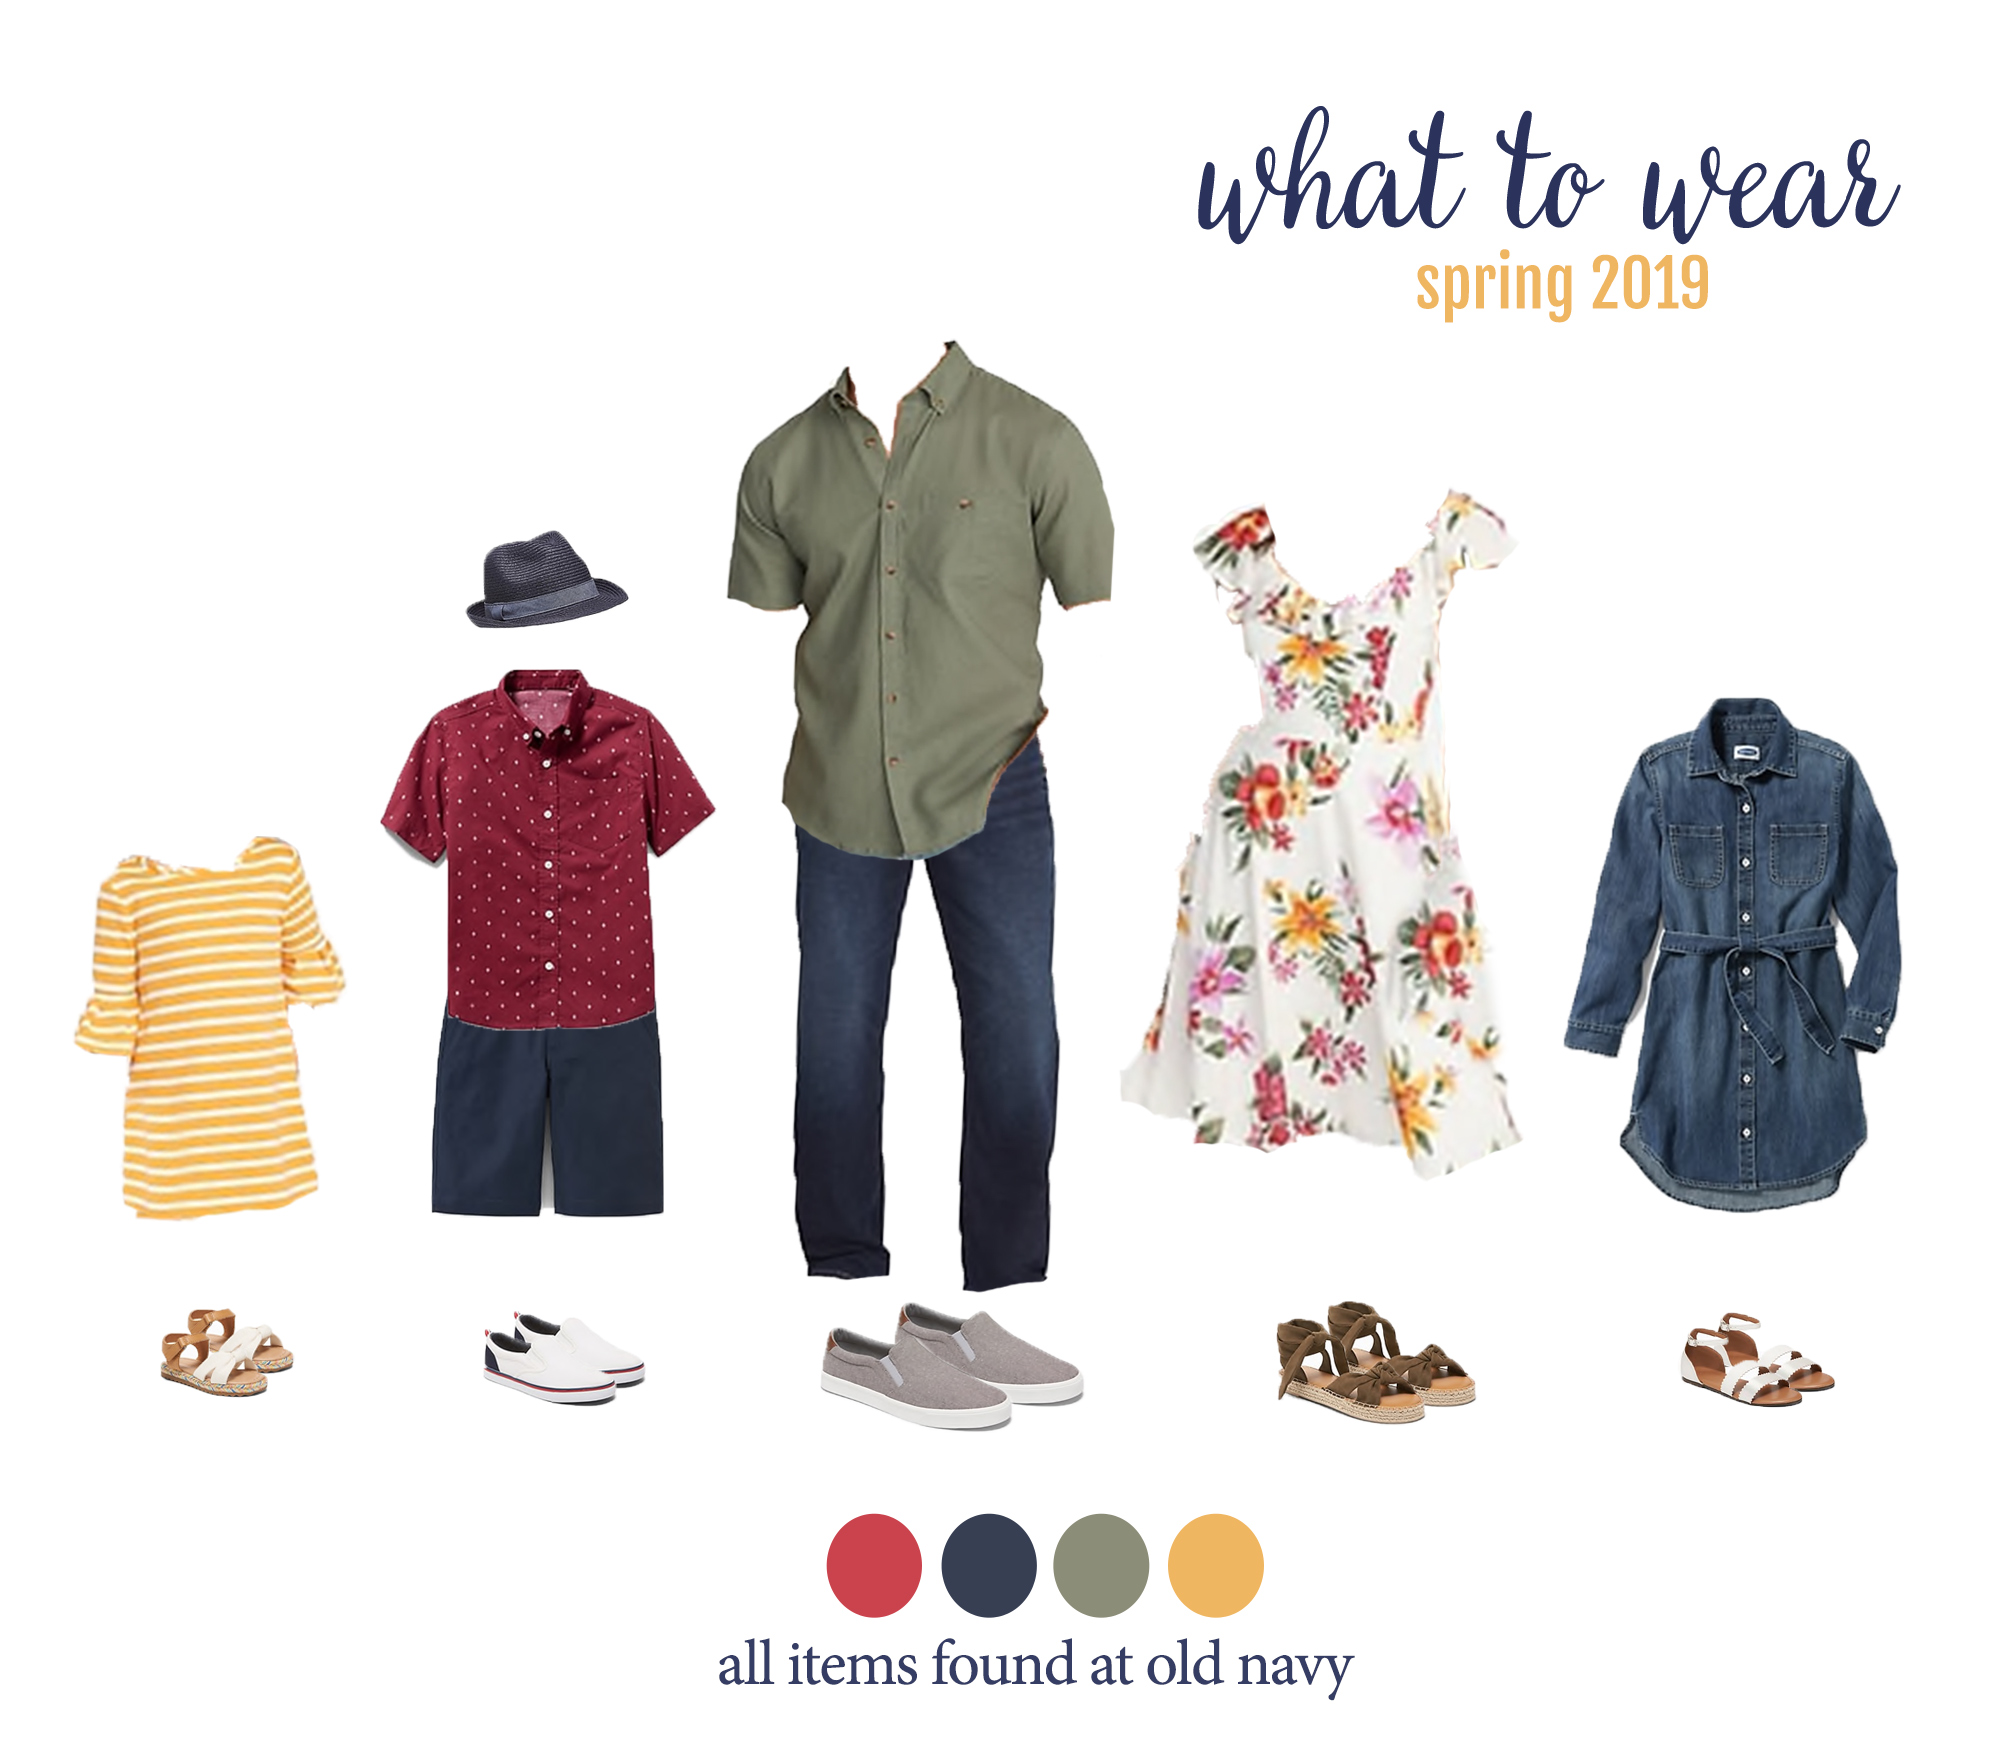 Not sure what to wear for spring family photos? Check out these cute and affordable looks from Old Navy!